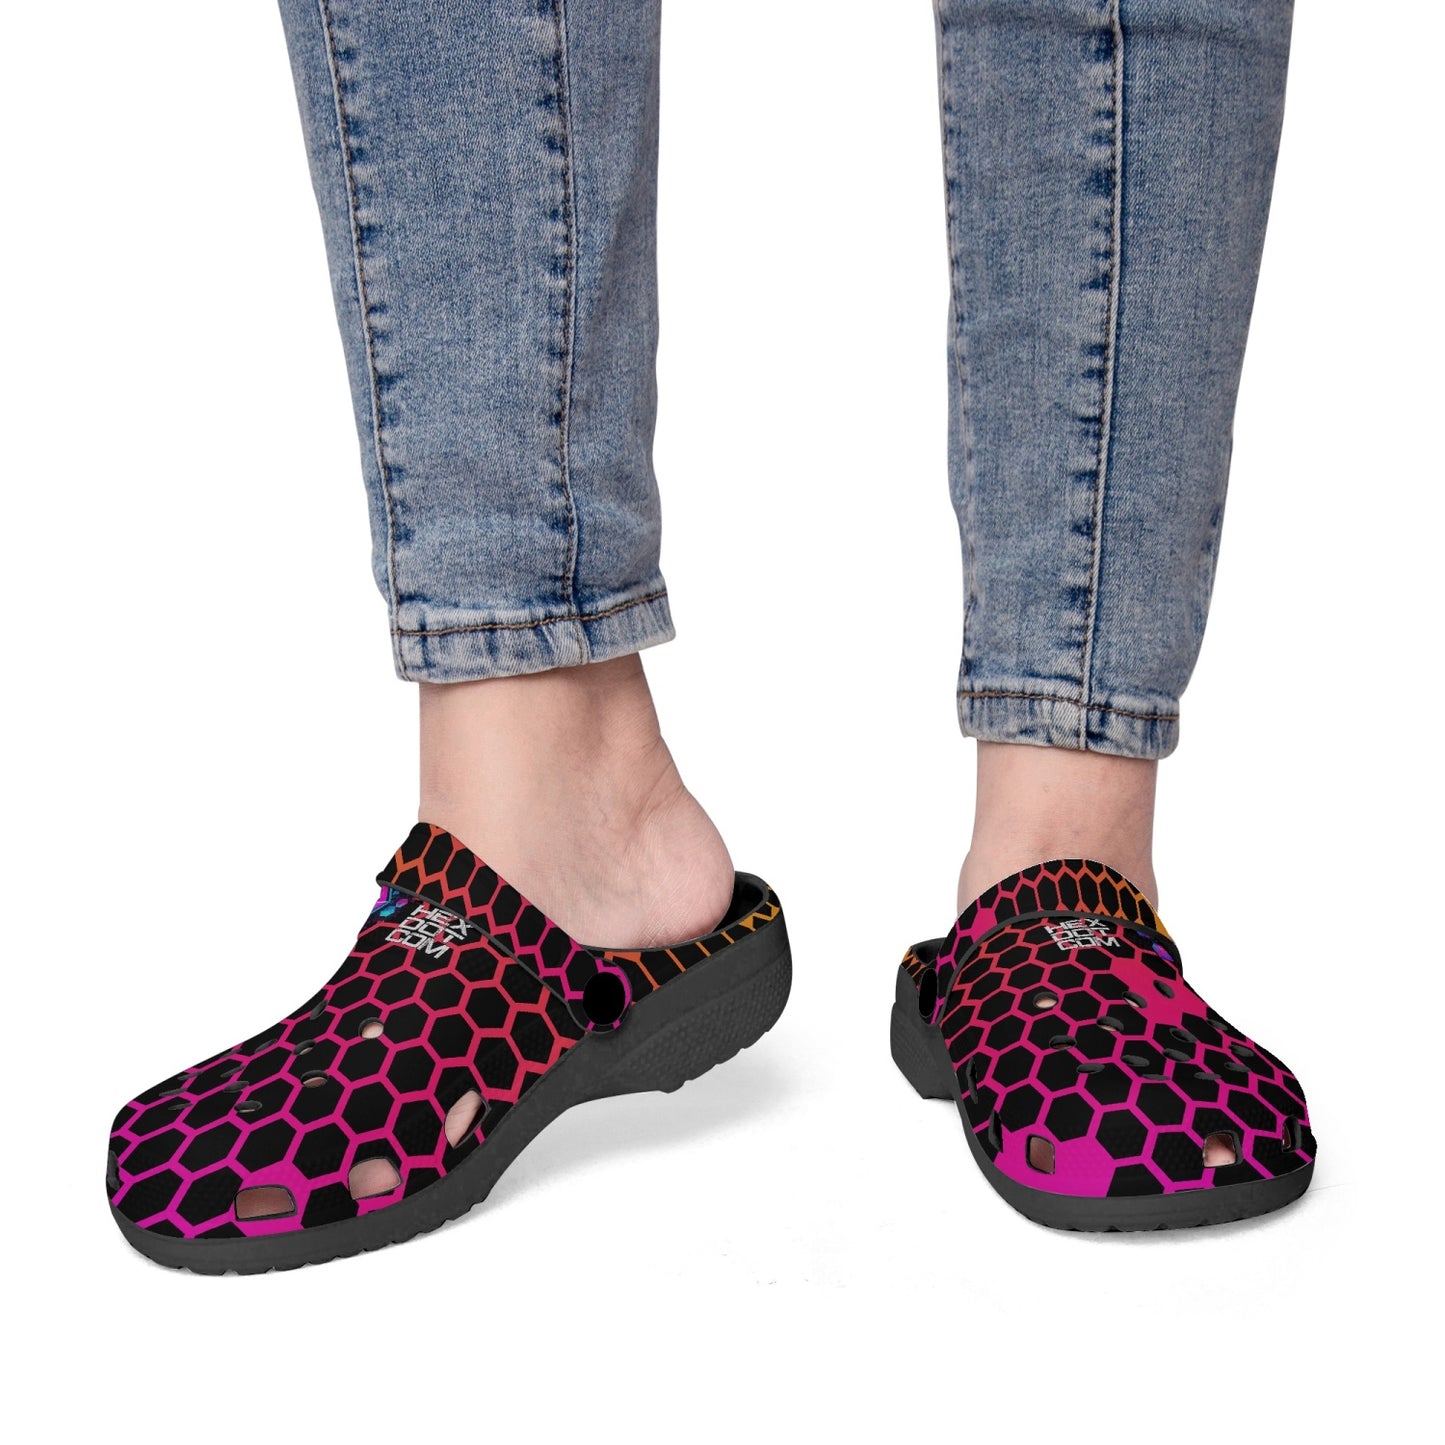 Magical HEX All Over Printed Clogs